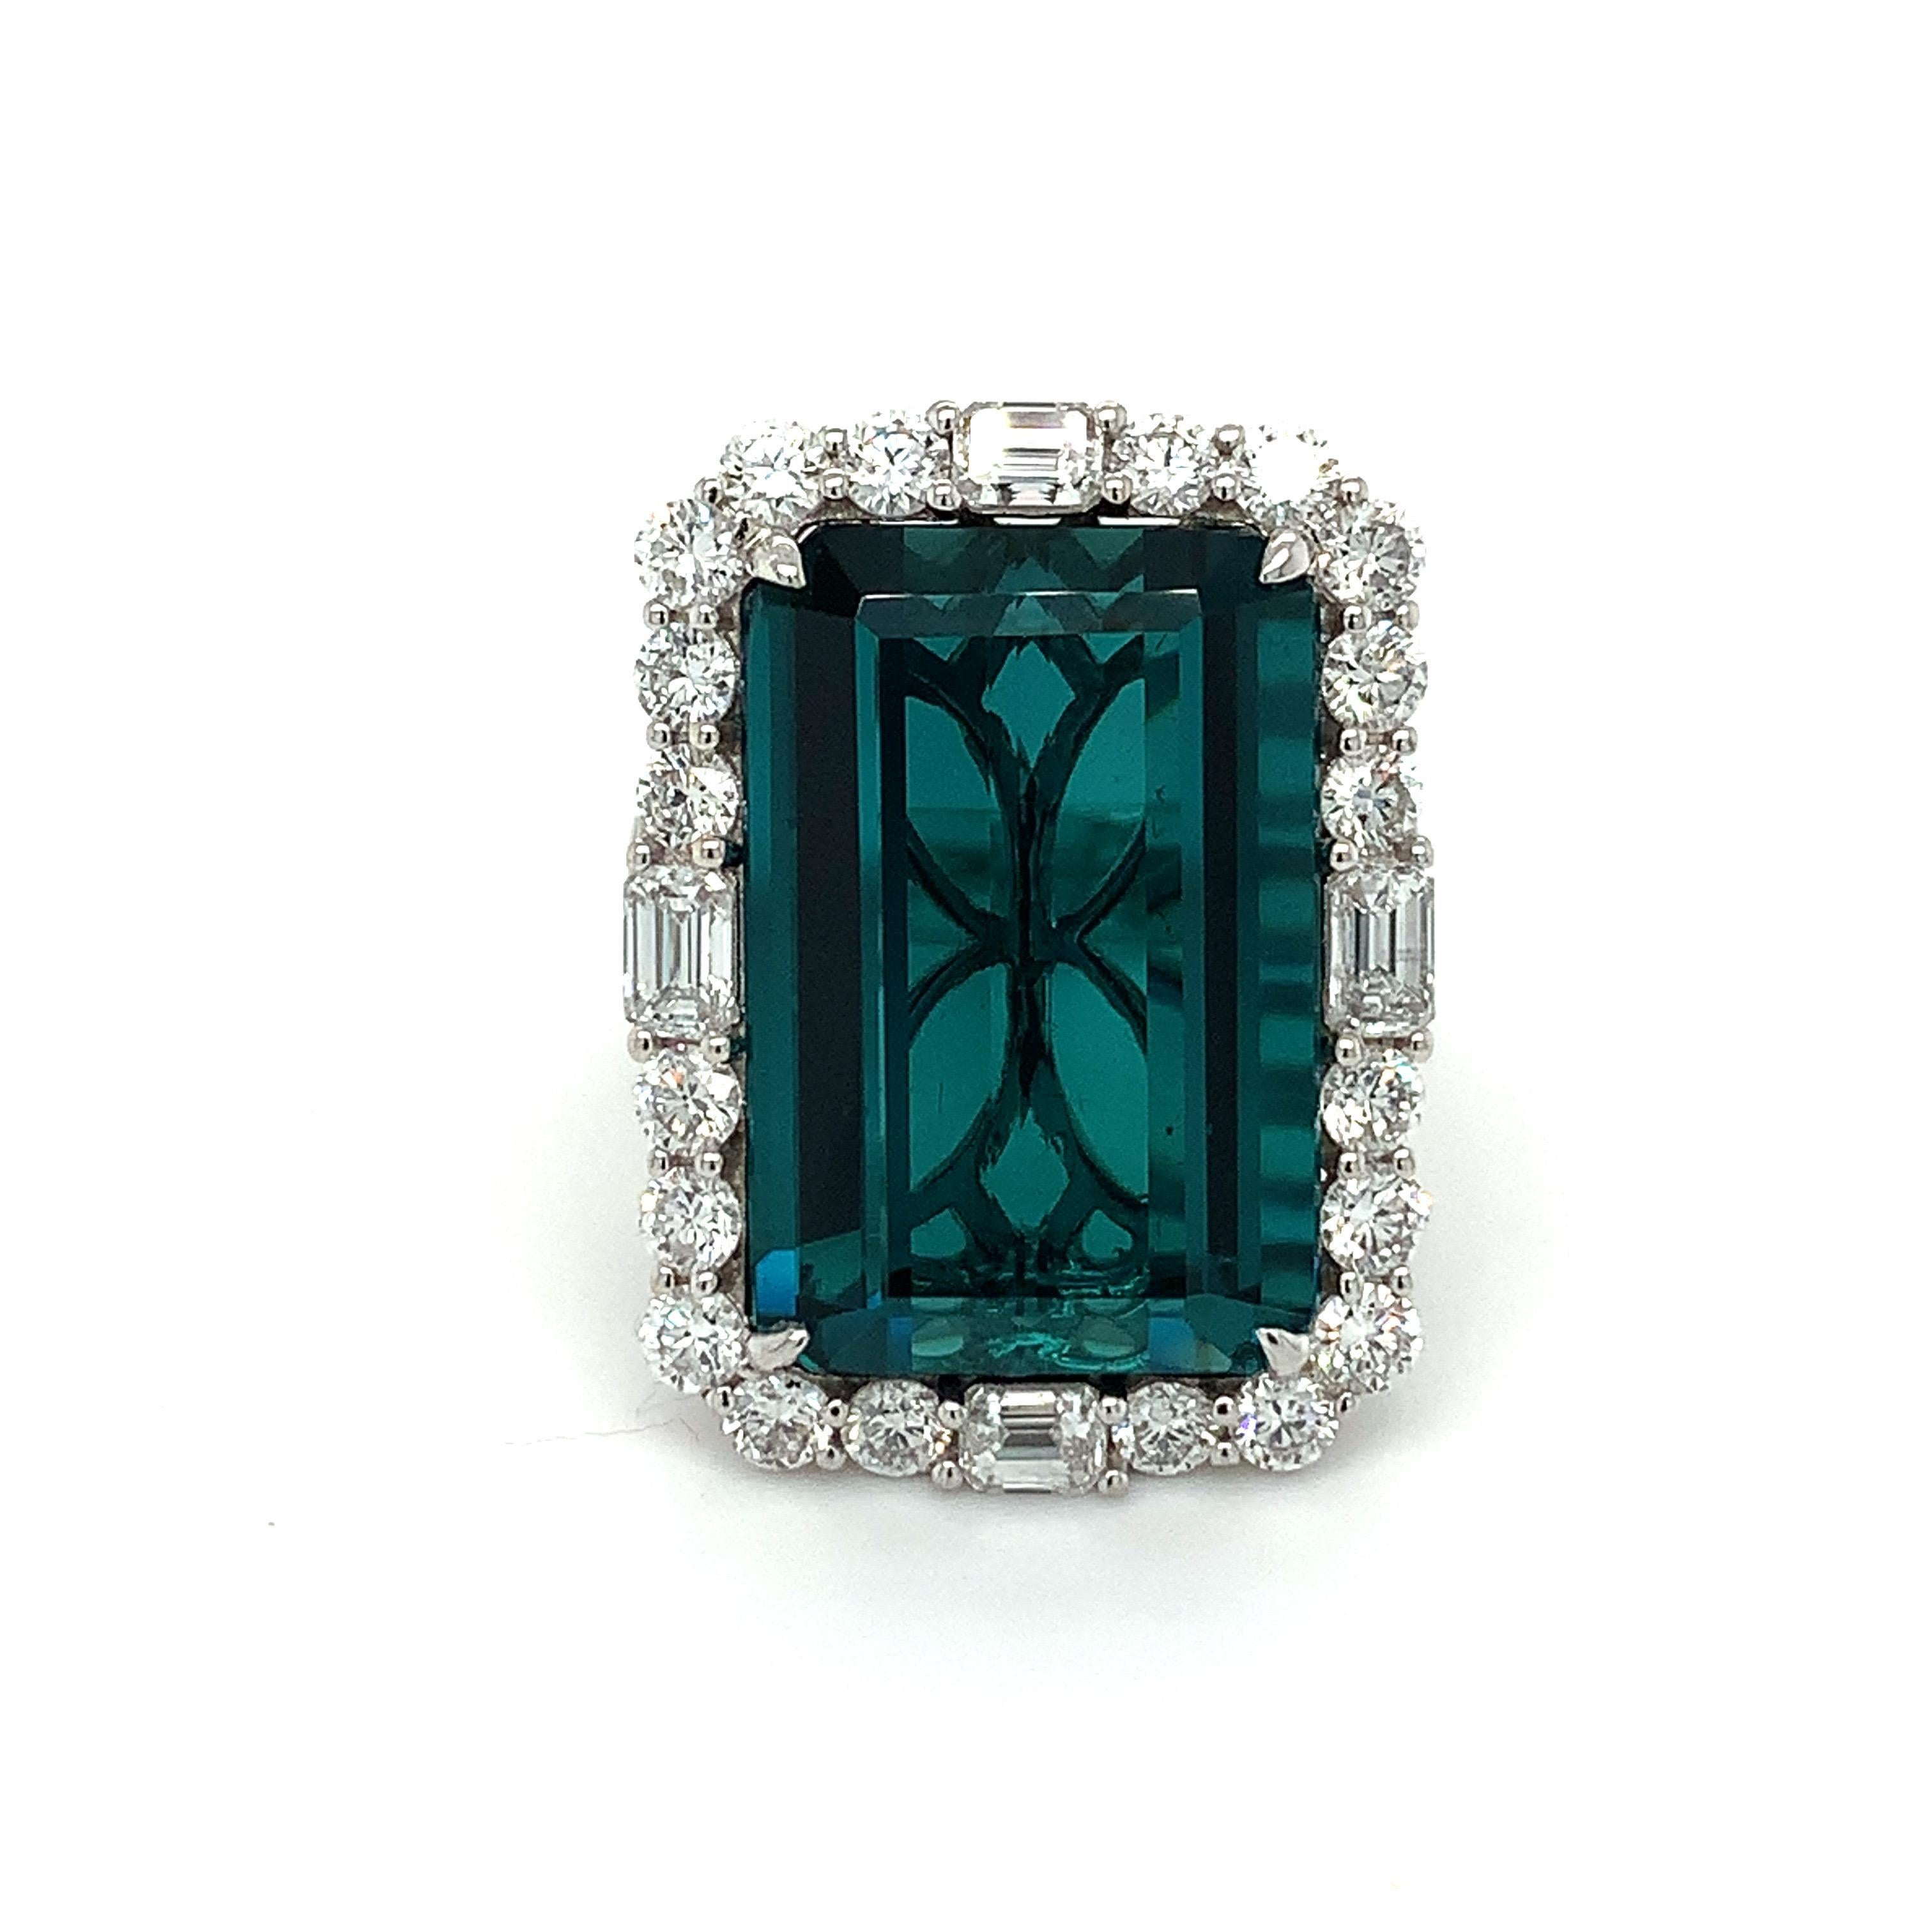 This stunning ring boasts 21.33 carat Octagonal Indicolite Tourmaline as a center stone surrounded by sparkling halo of 2.56 carat white round and baguette diamonds. The ring is hand crafted with the classic four prongs and three stripe pave diamond